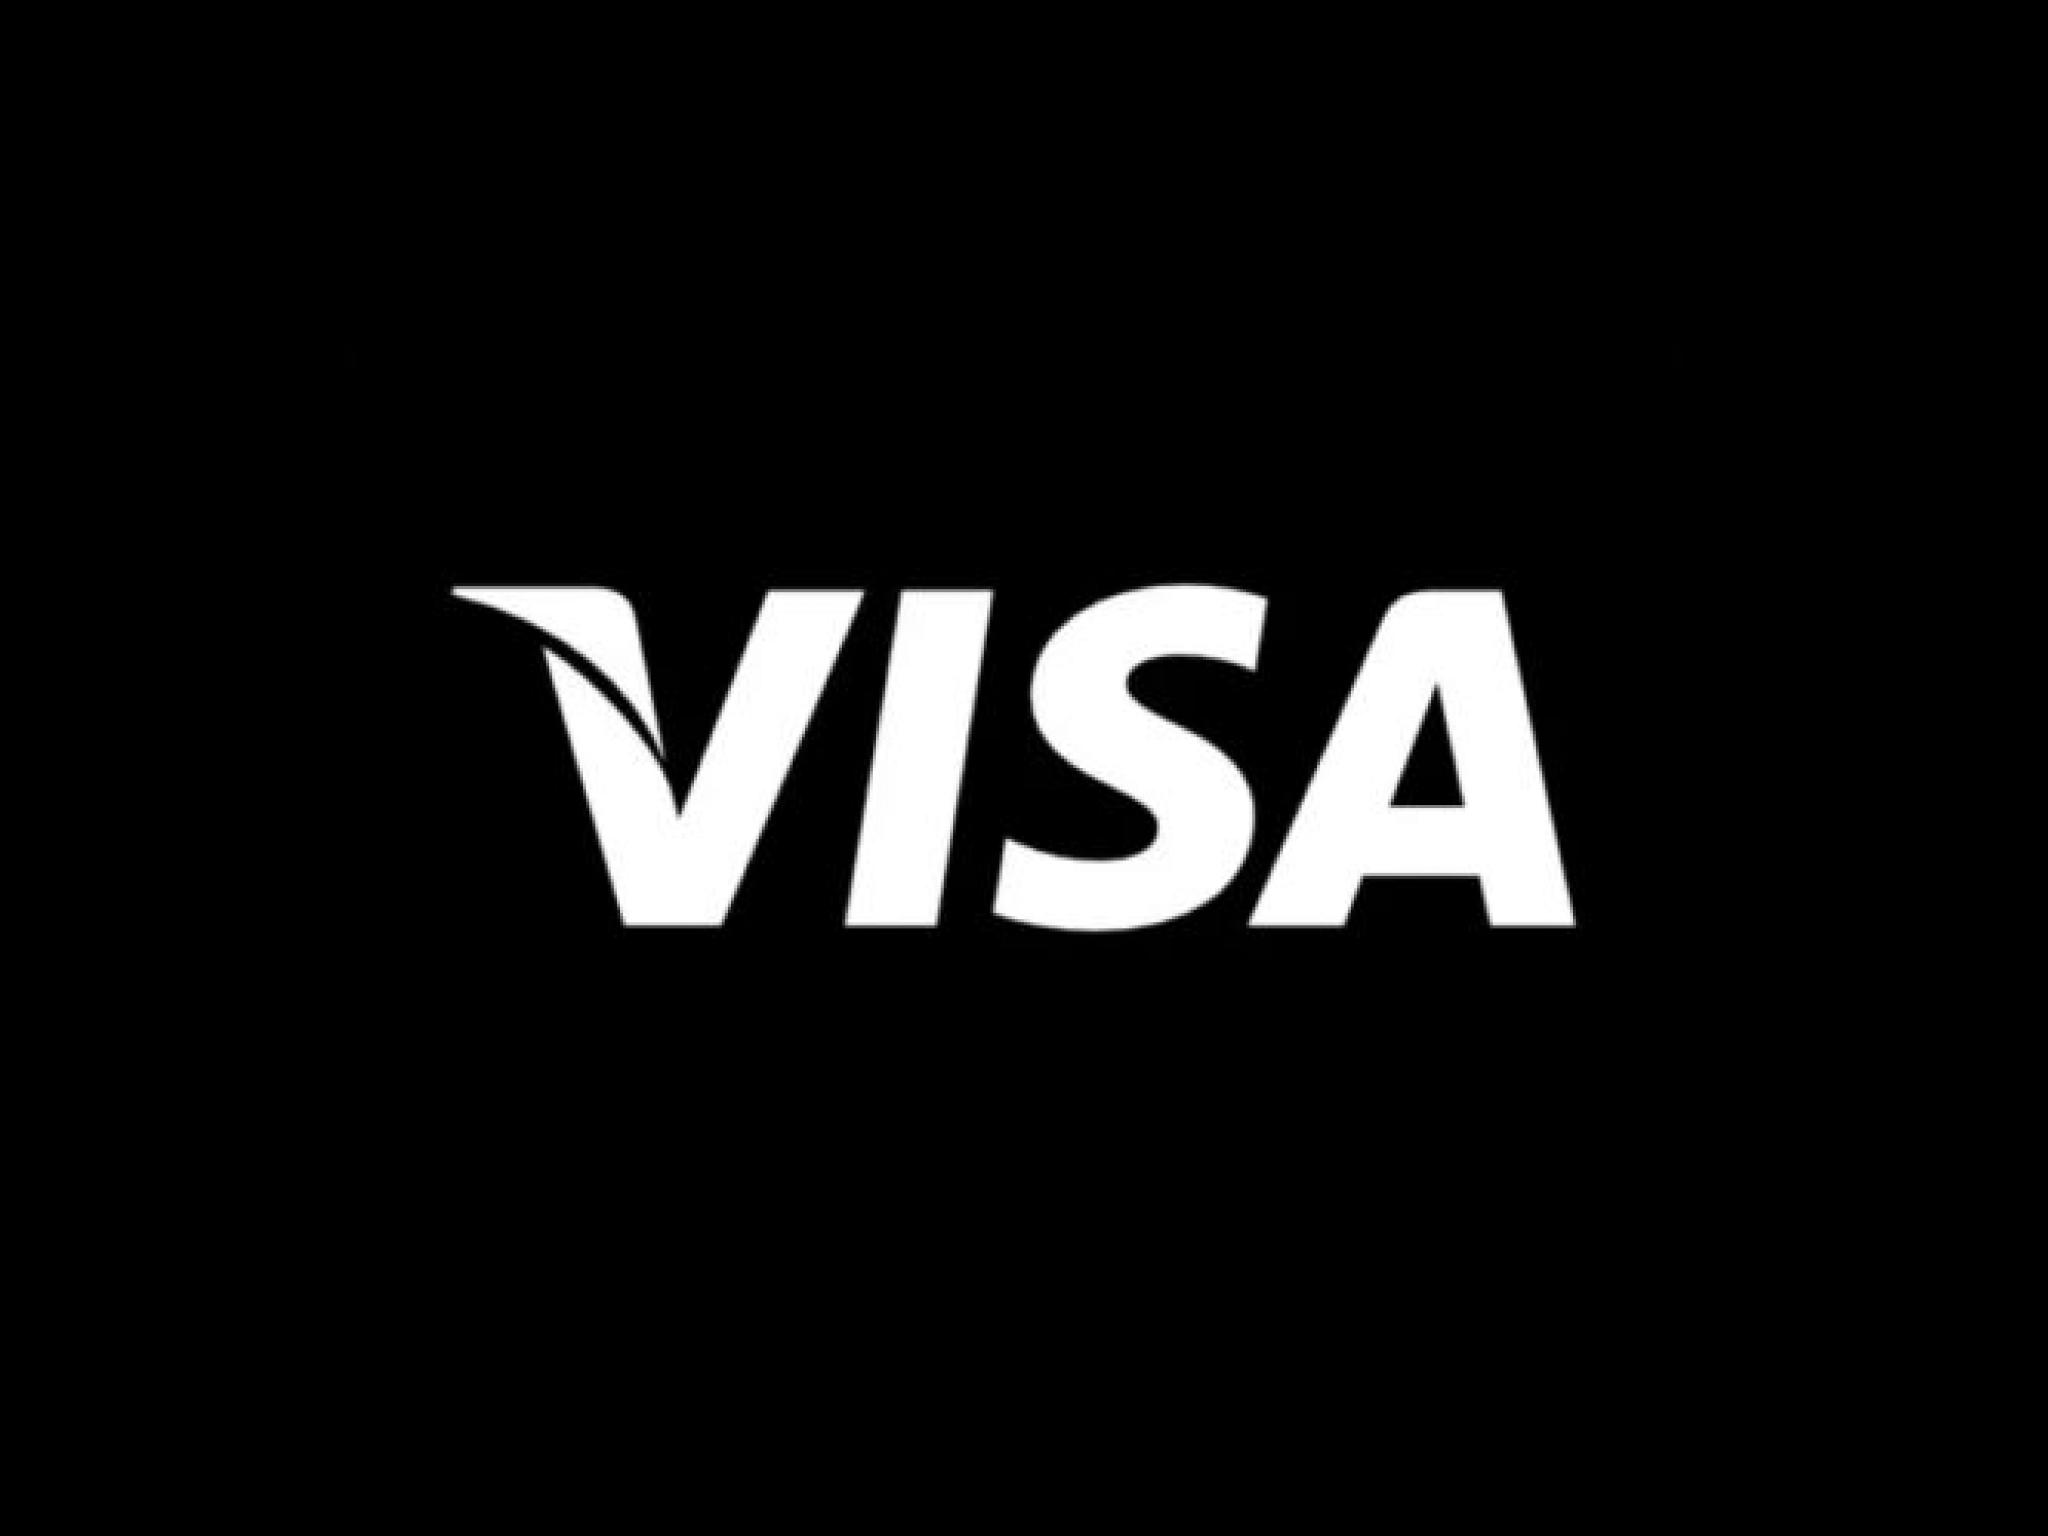  visa-likely-to-report-higher-q2-earnings-here-are-the-recent-forecast-changes-from-wall-streets-most-accurate-analysts 